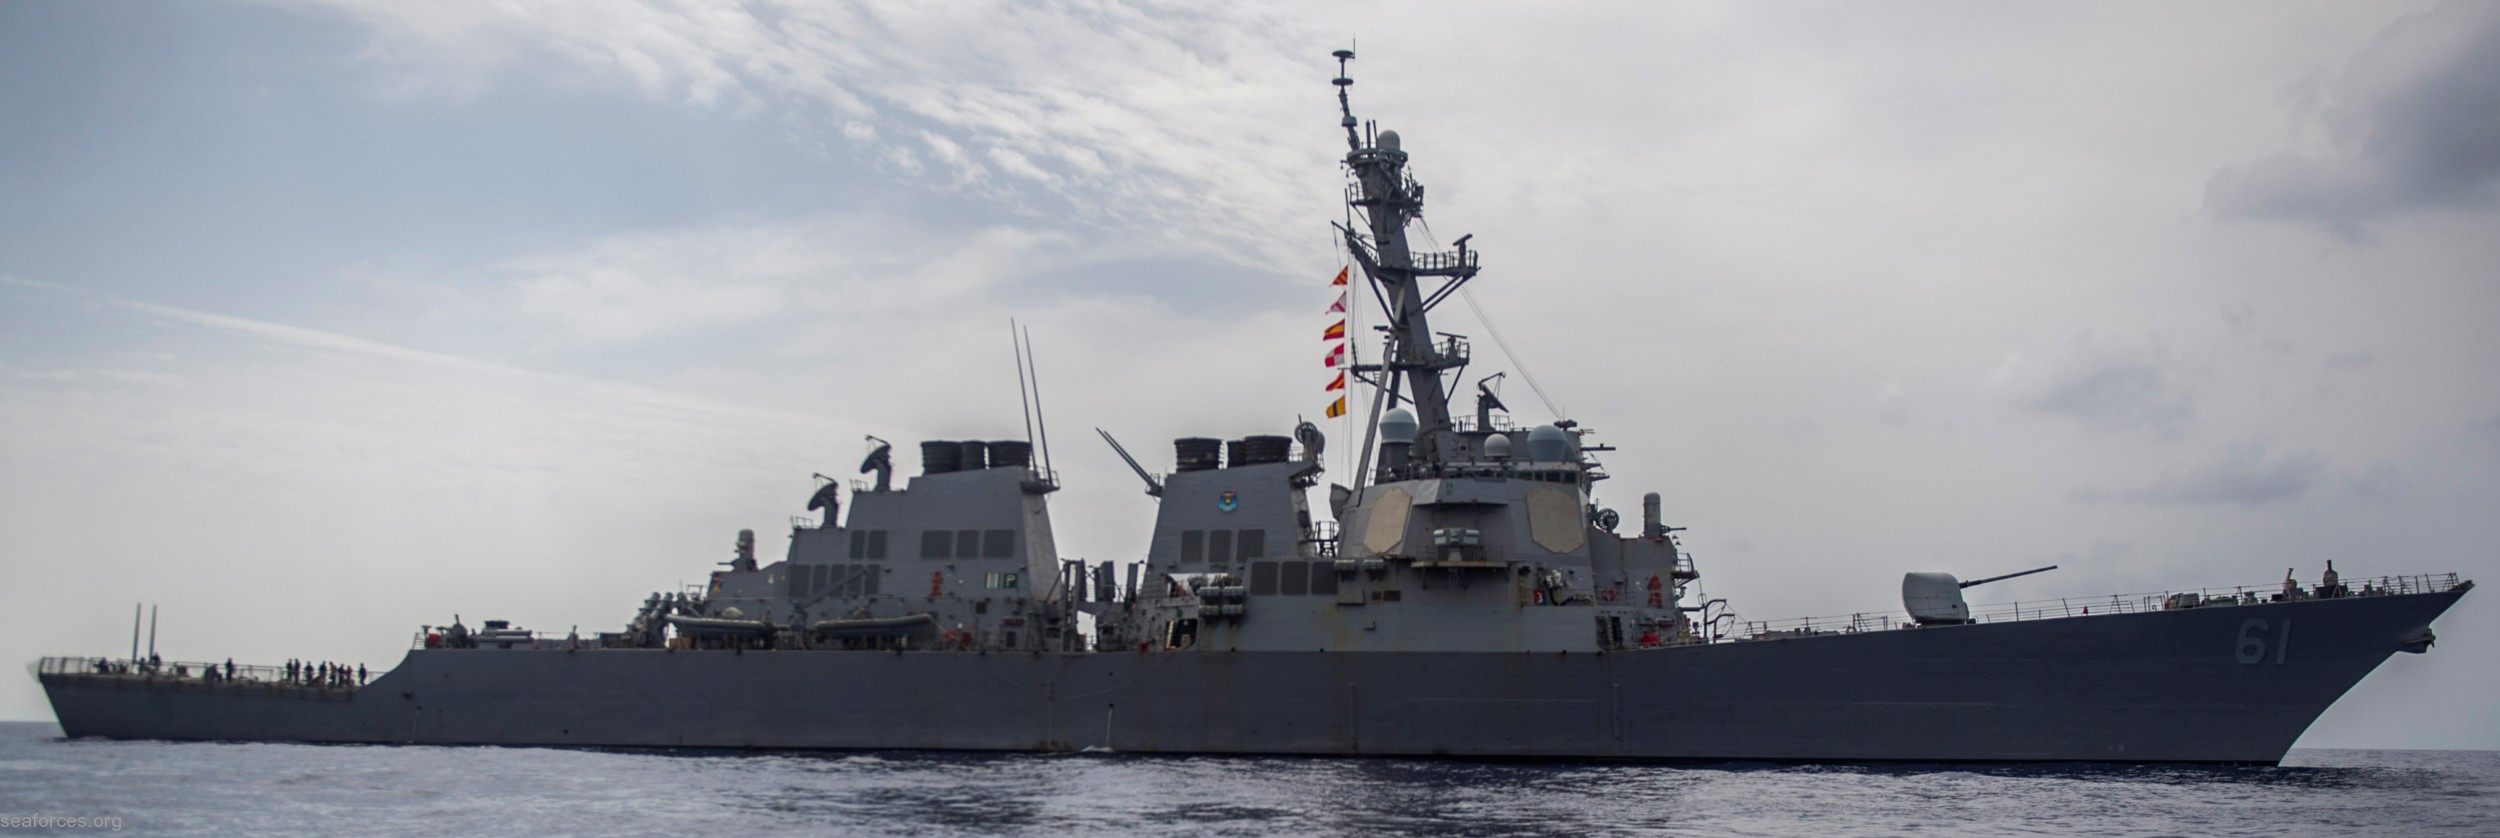 ddg-61 uss ramage guided missile destroyer us navy 32